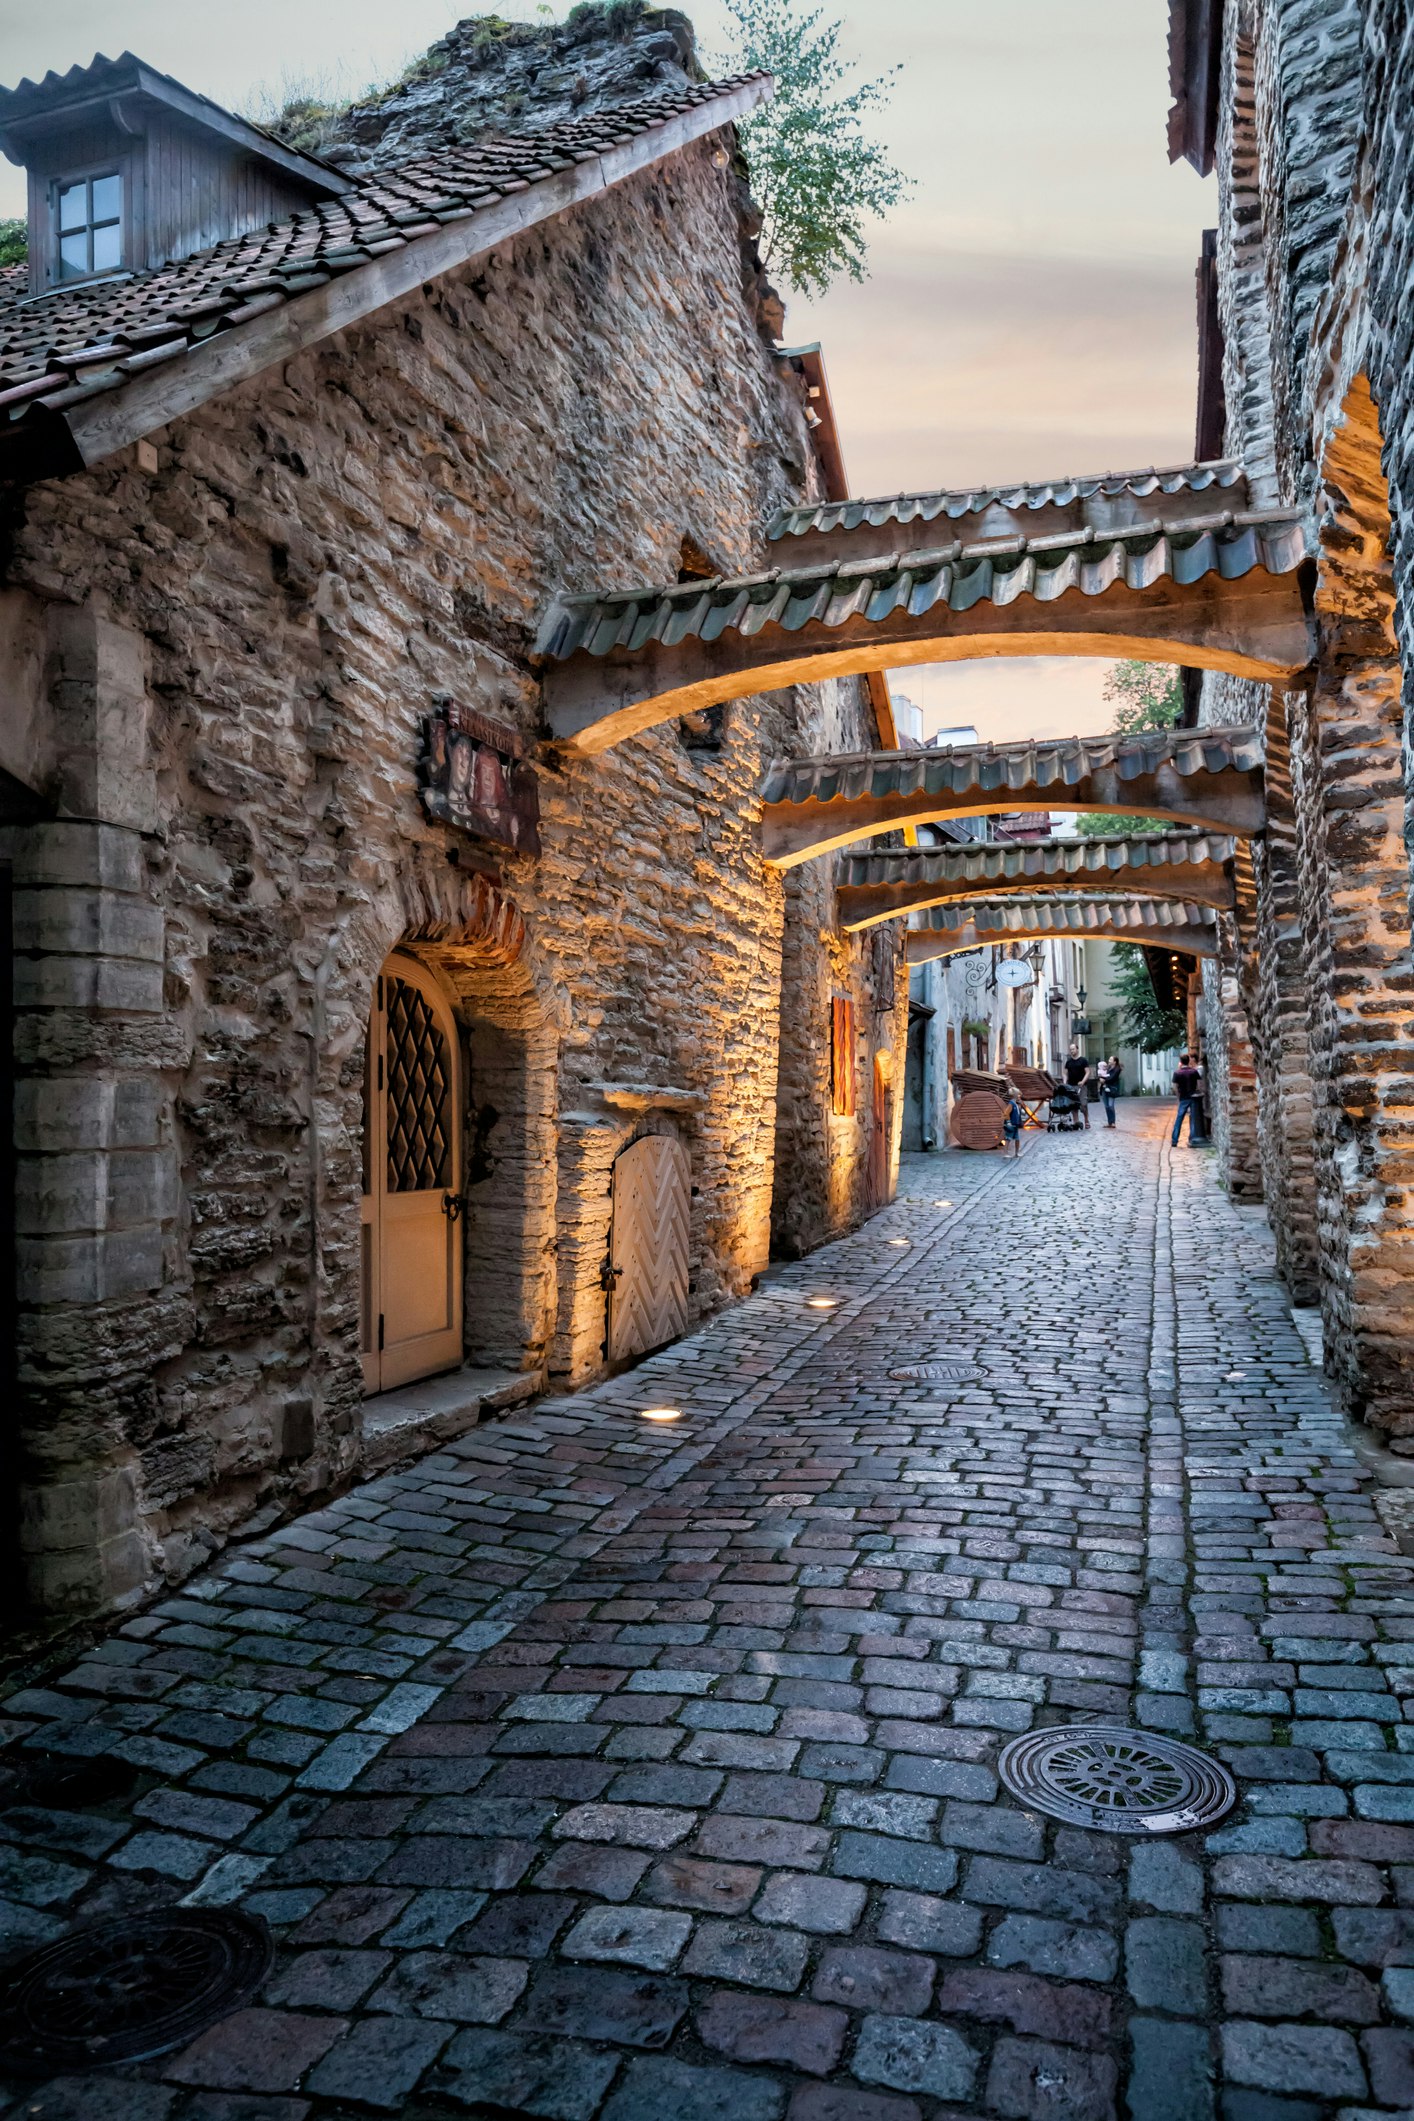 The cobbled streets of St Catherine's Passage in Tallinn